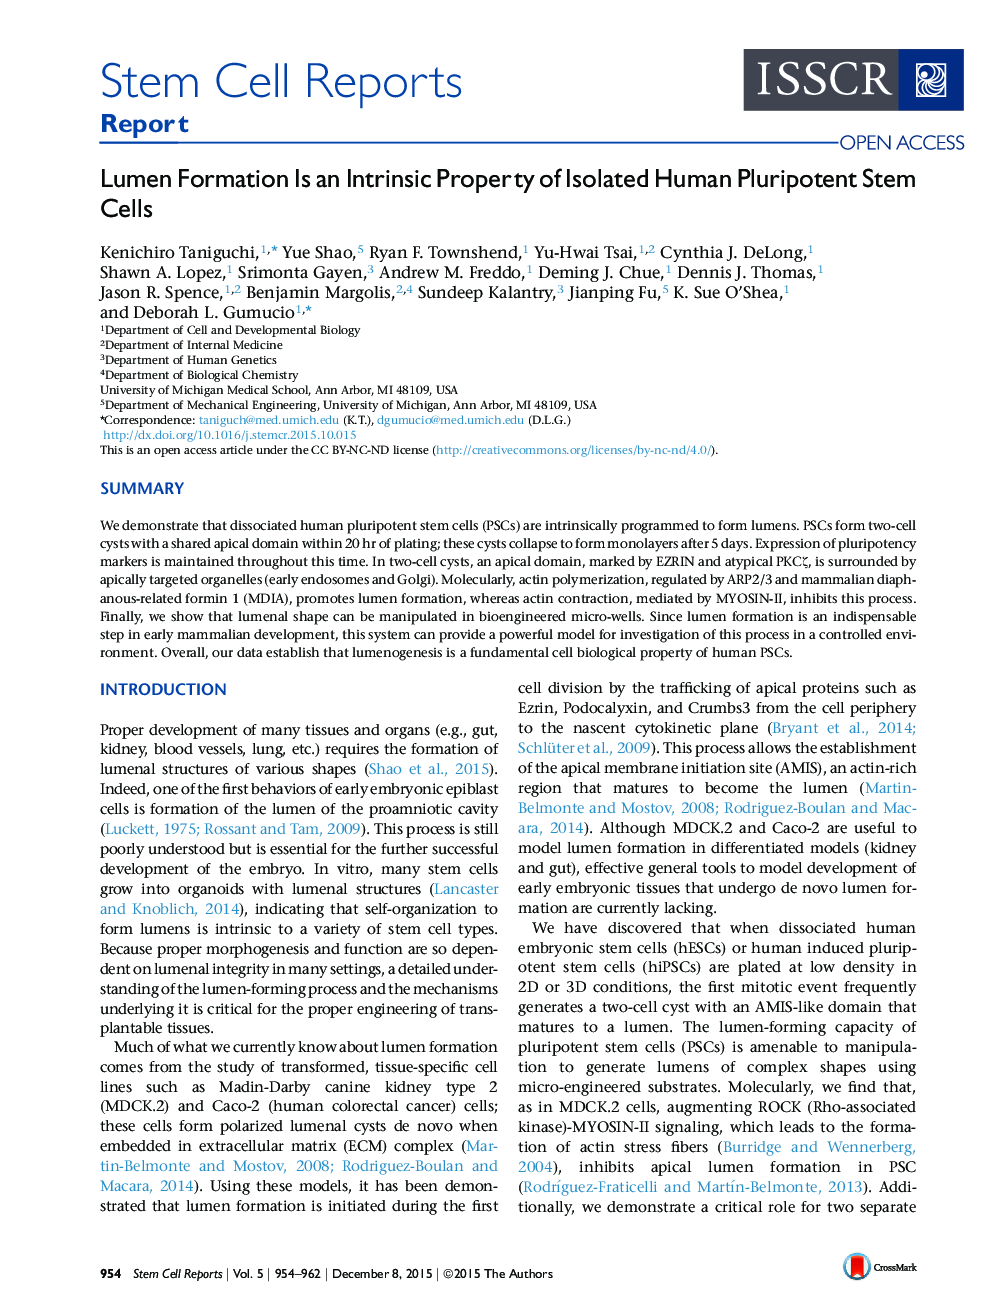 Lumen Formation Is an Intrinsic Property of Isolated Human Pluripotent Stem Cells 